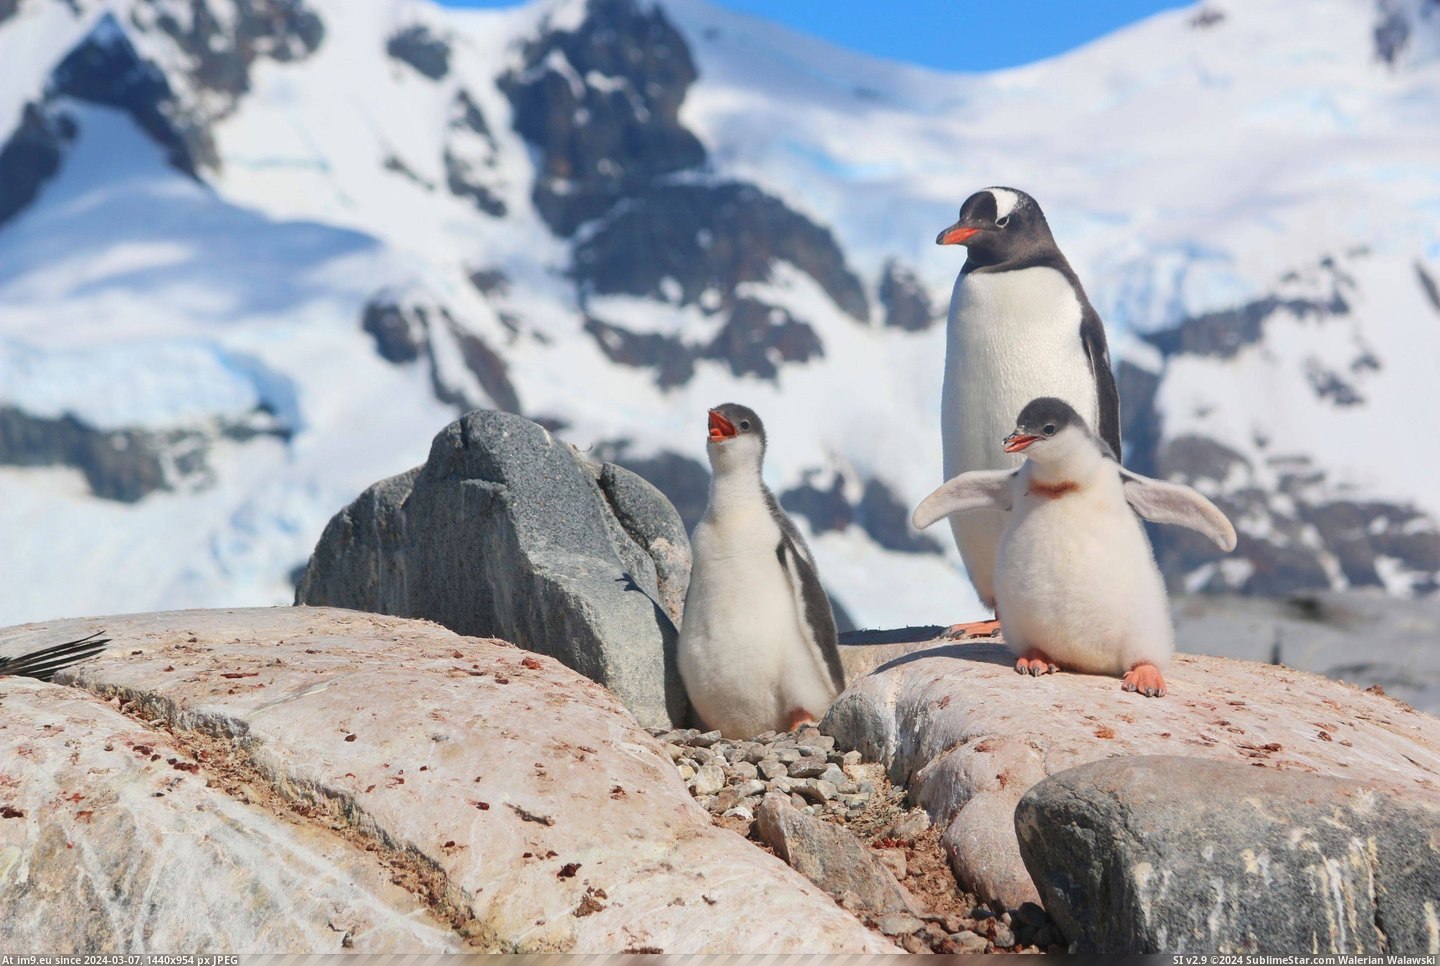 #Wallpaper #Beautiful #Happy #Snow #Highres #Antarctica #Opportunity #Family #Month #Ran #Visit [Aww] Last month I had the opportunity to visit Antarctica, where I ran into this happy family! Pic. (Image of album My r/AWW favs))